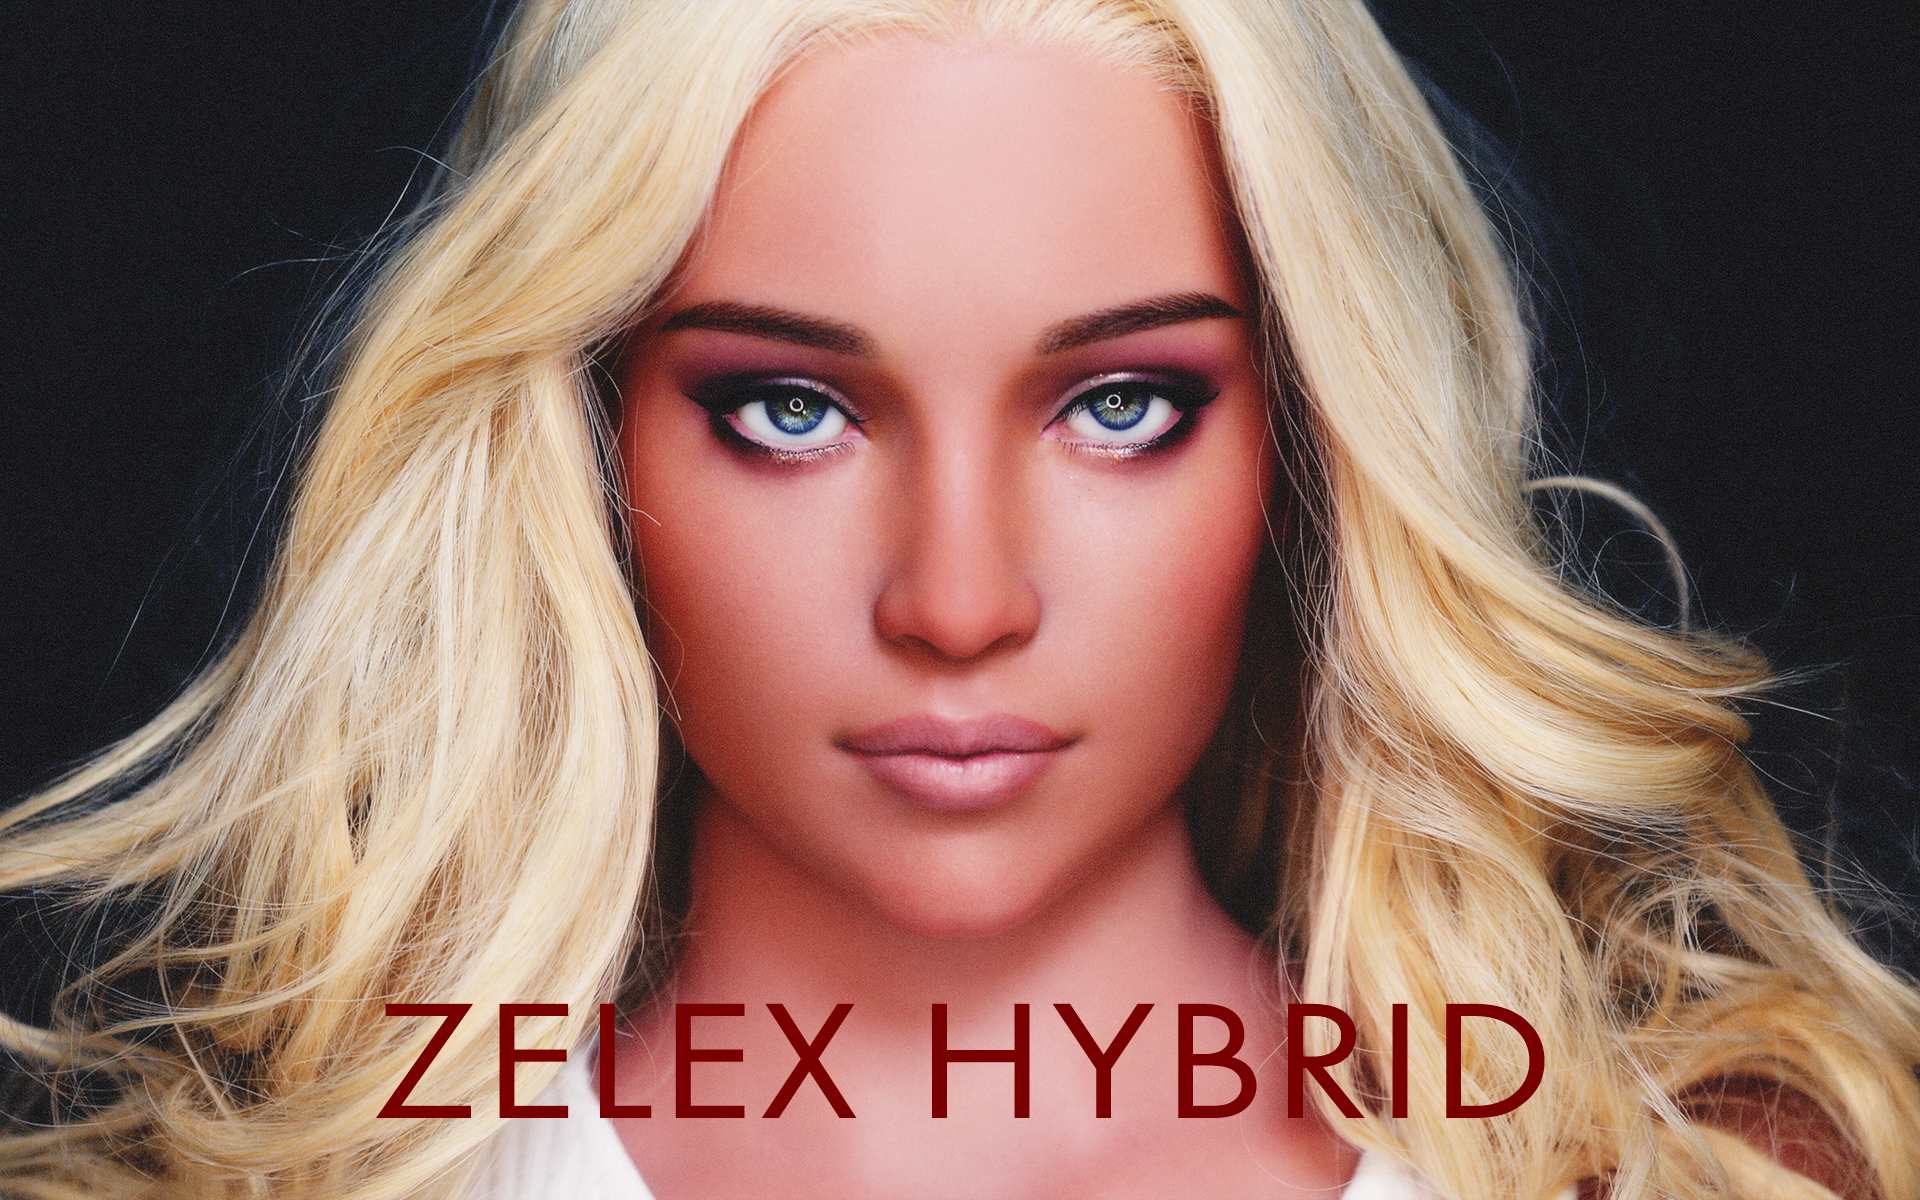 Zelex has developed a hybrid sex doll made with a TPE body and silicone head so you can get the best of both worlds.